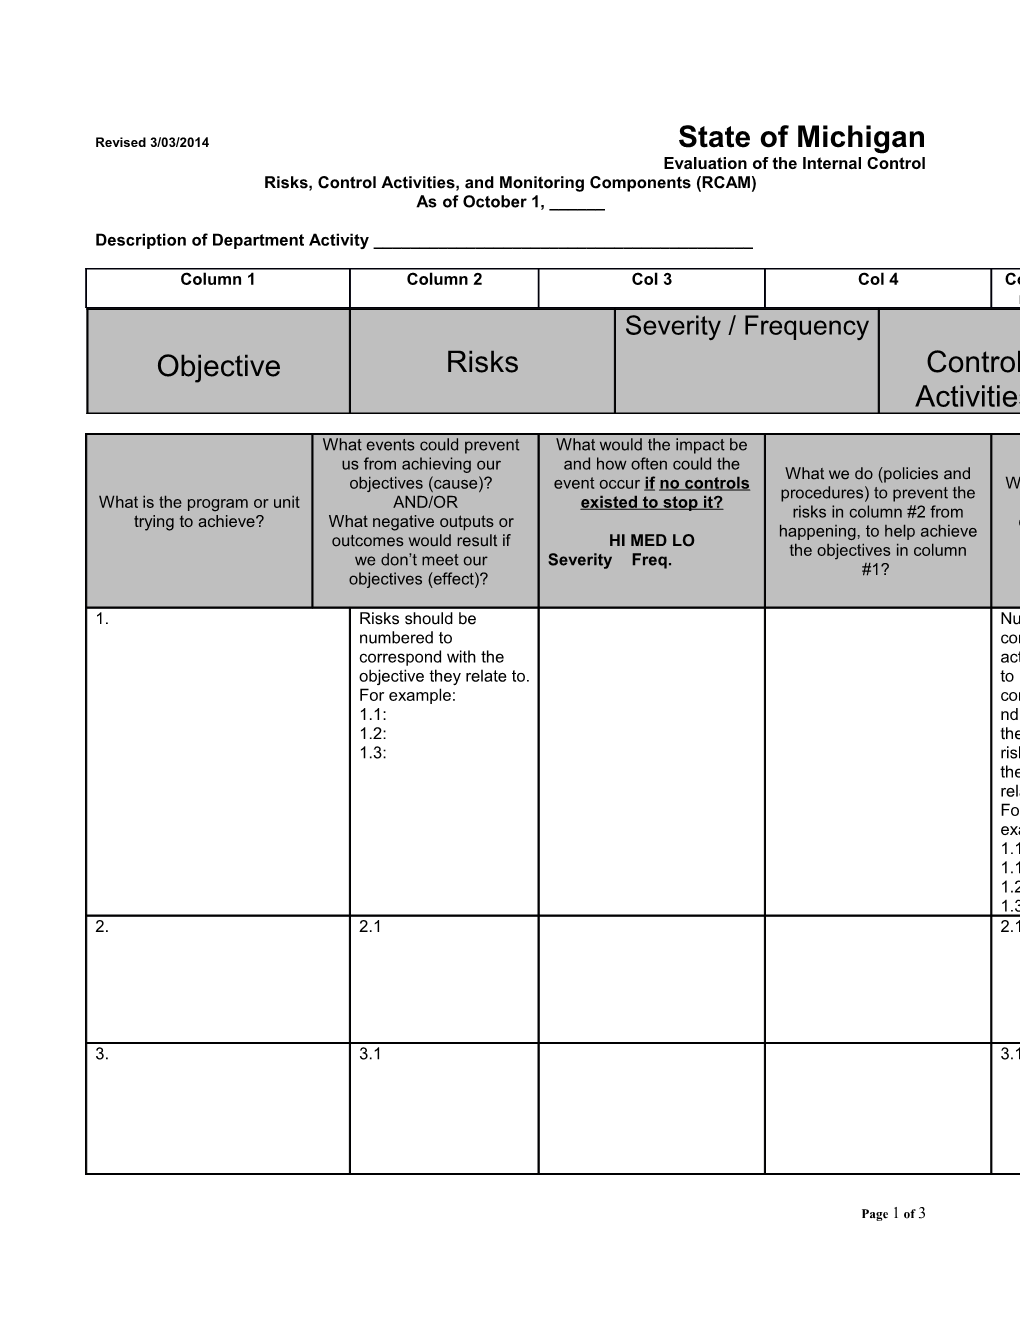 Risk Assessment and Control Activities Worksheet